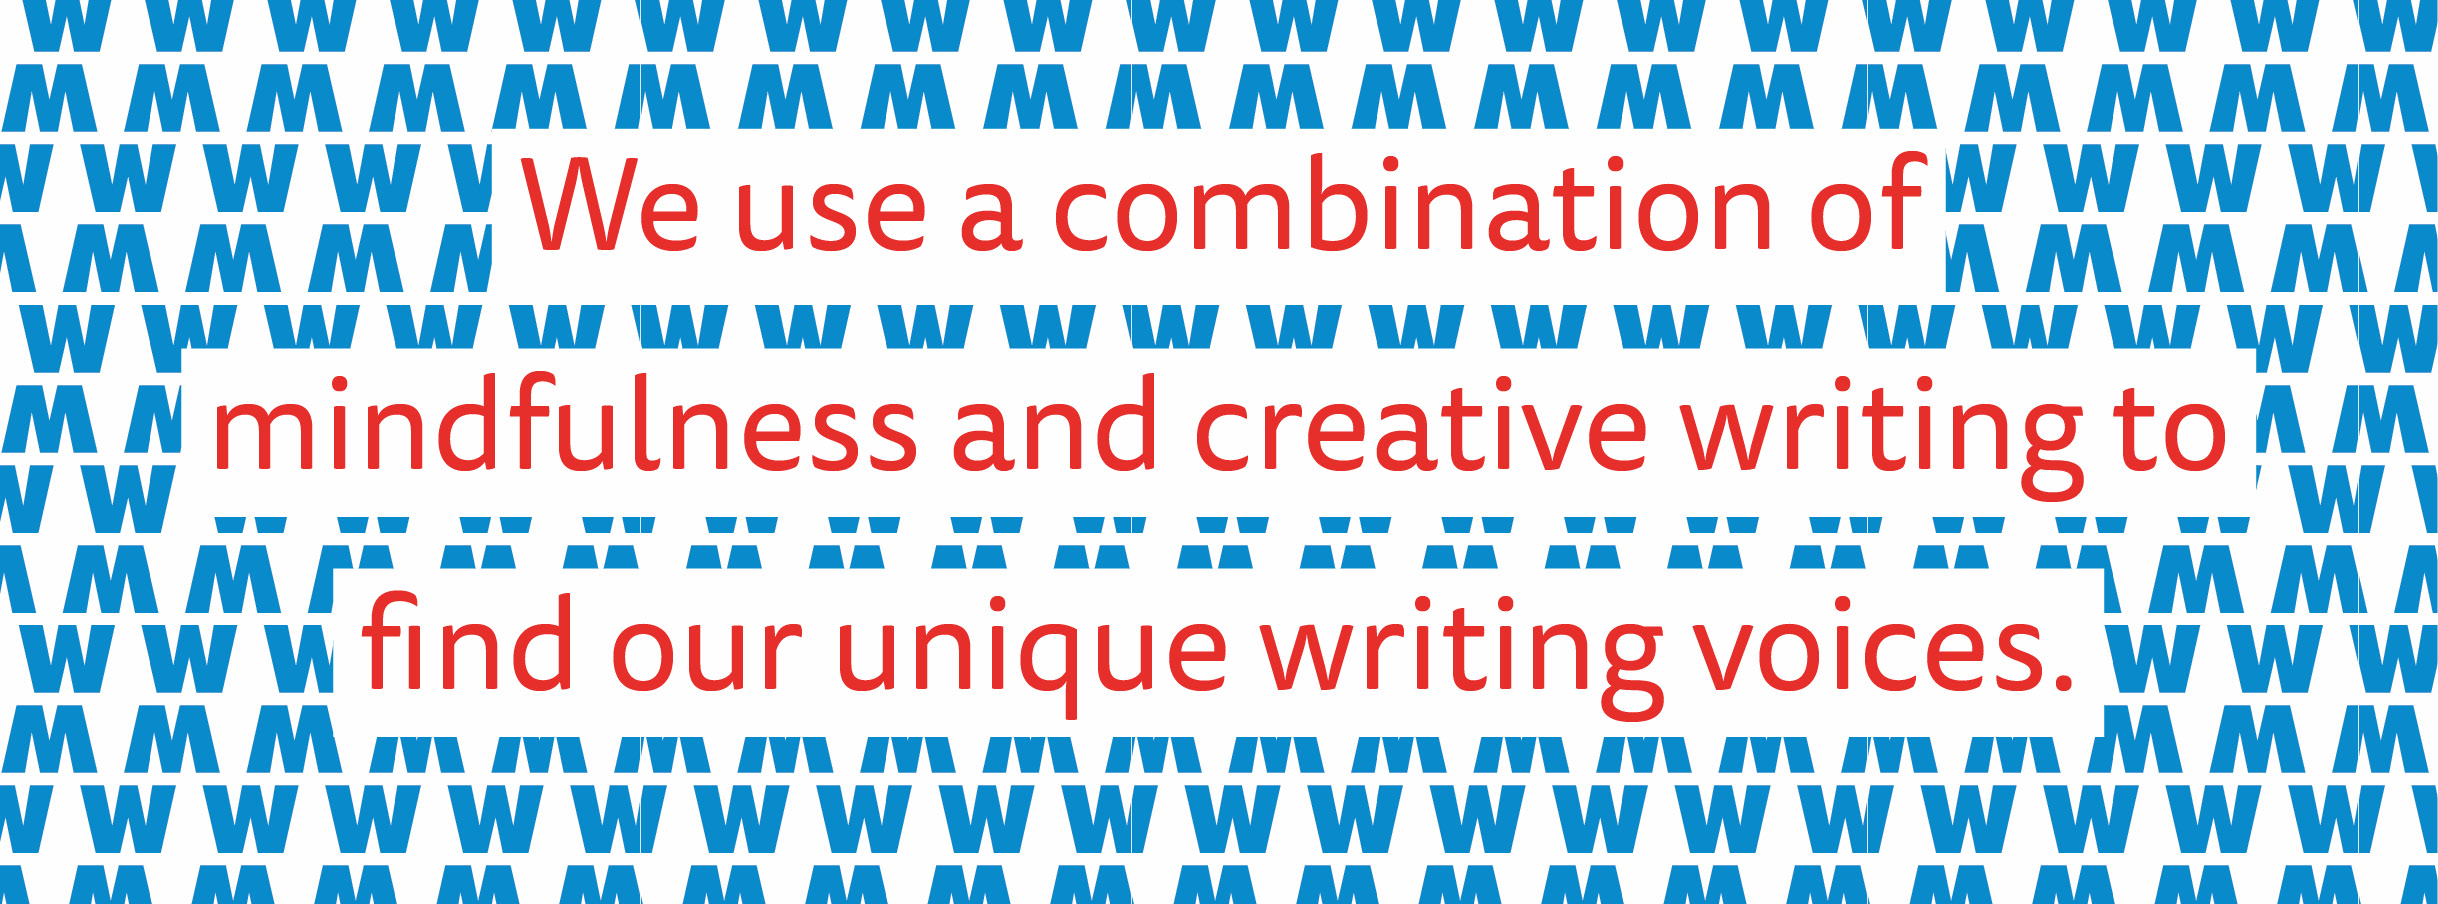 We use a combination of mindfulness and creative writing to  find our  unique  writing voices.’ Value statement set in magenta a humanist san serif typeface, with a white background. The statement is on top of a blue pattern created by the w from the logo.